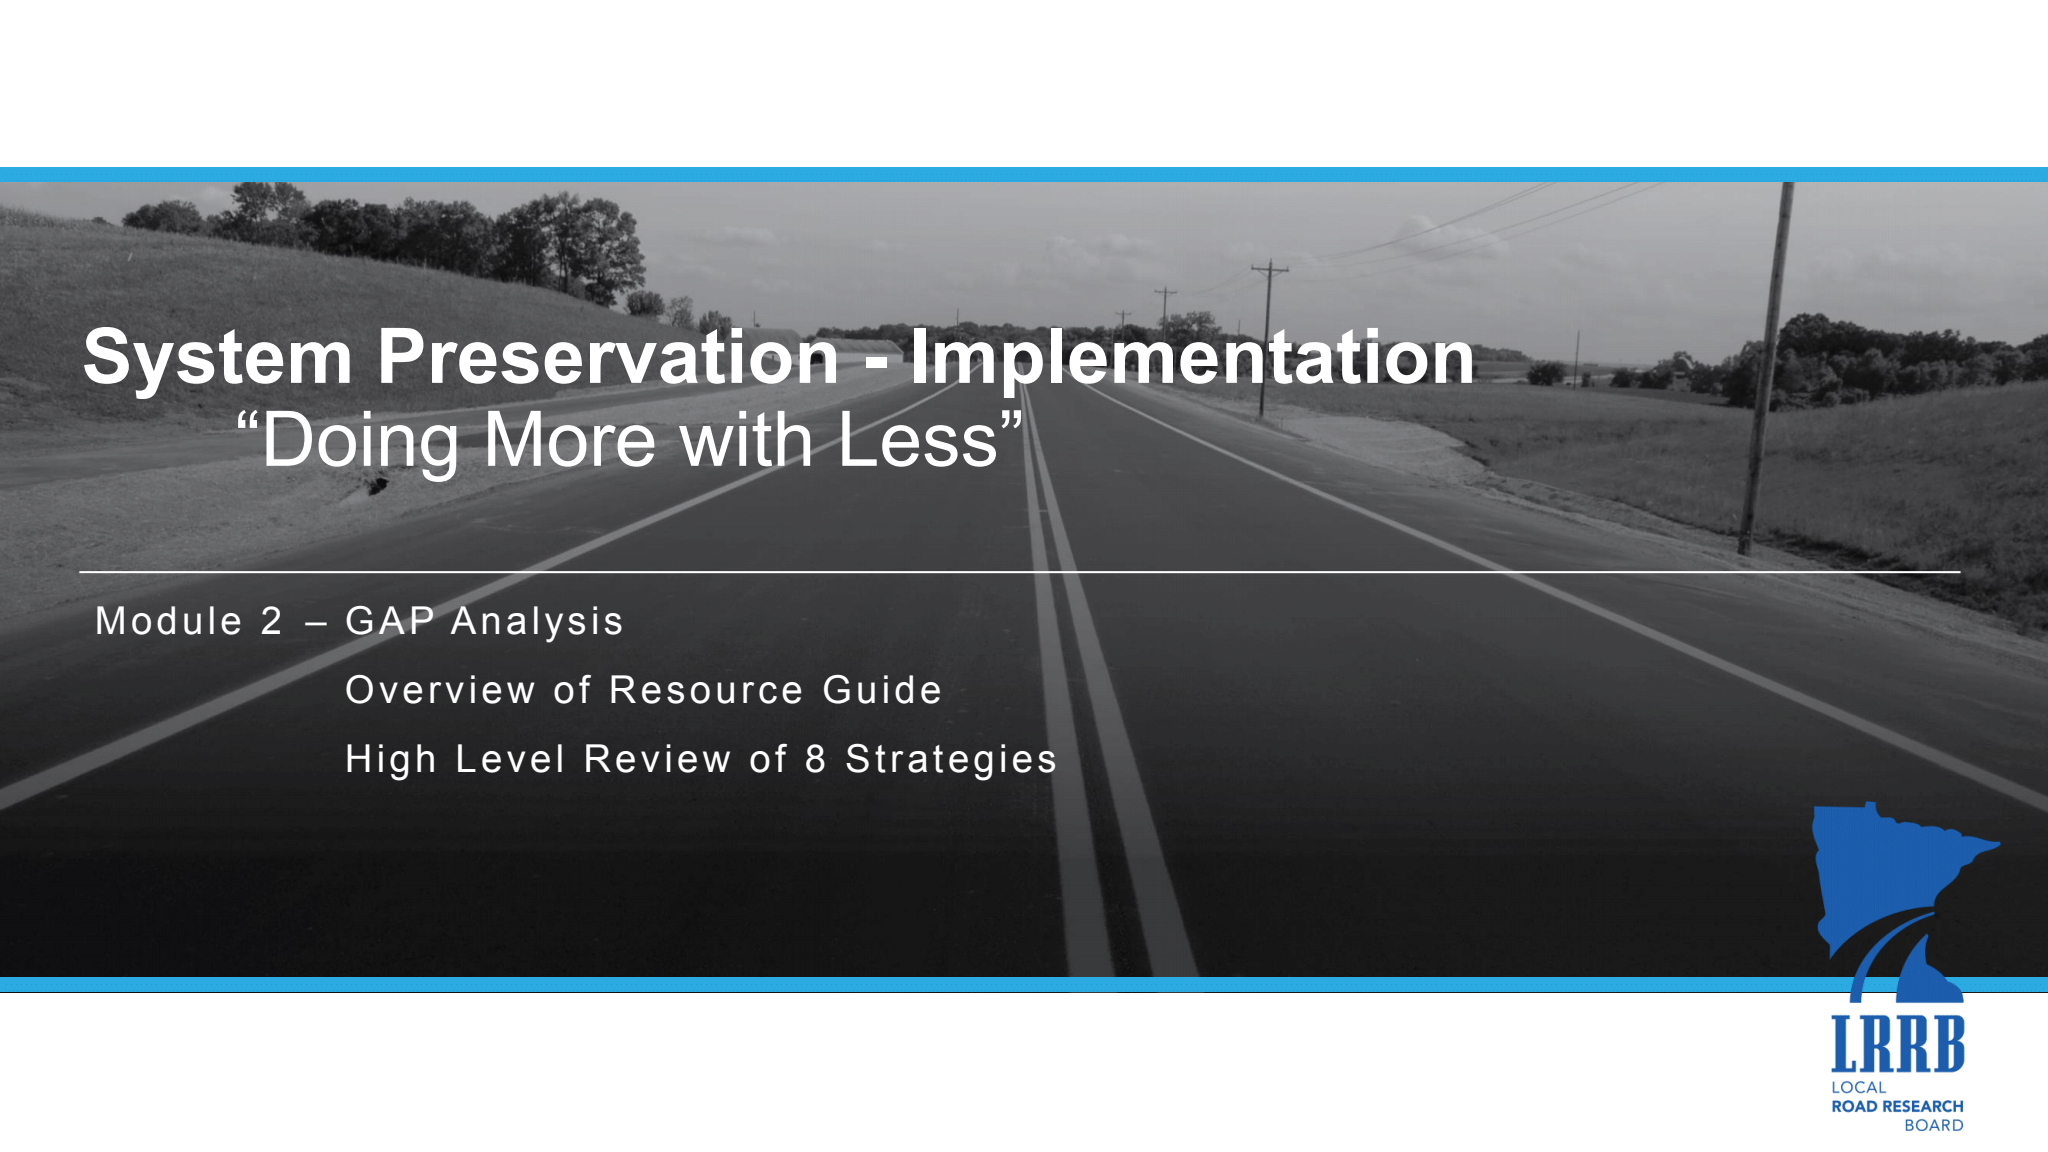 System Preservation PowerPoint training module